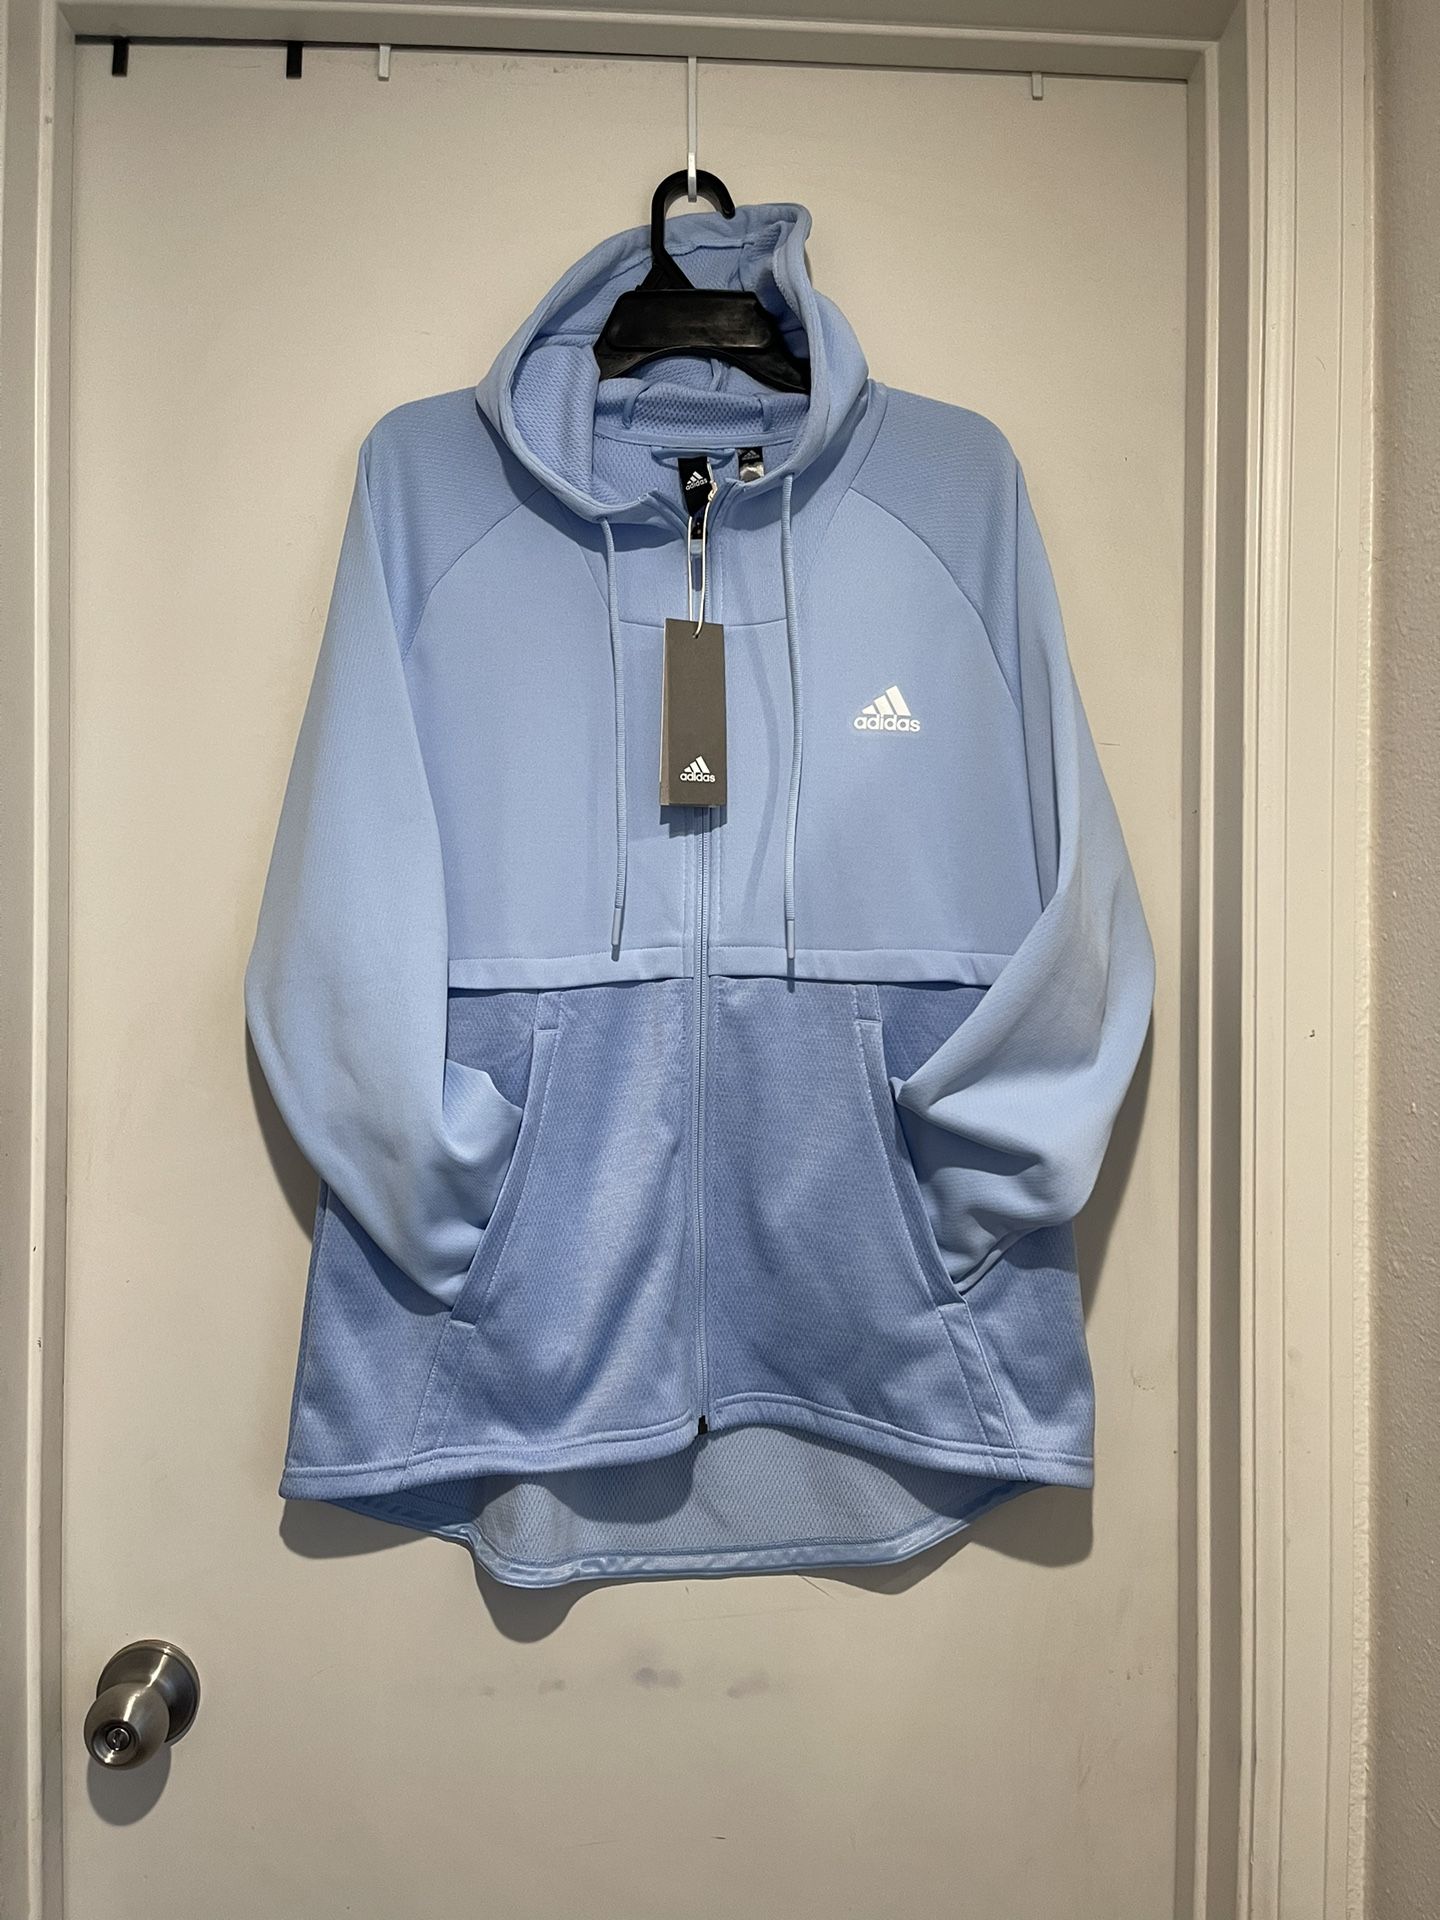 New Women’s Hoodie Size XL From Adidas Still With Tags